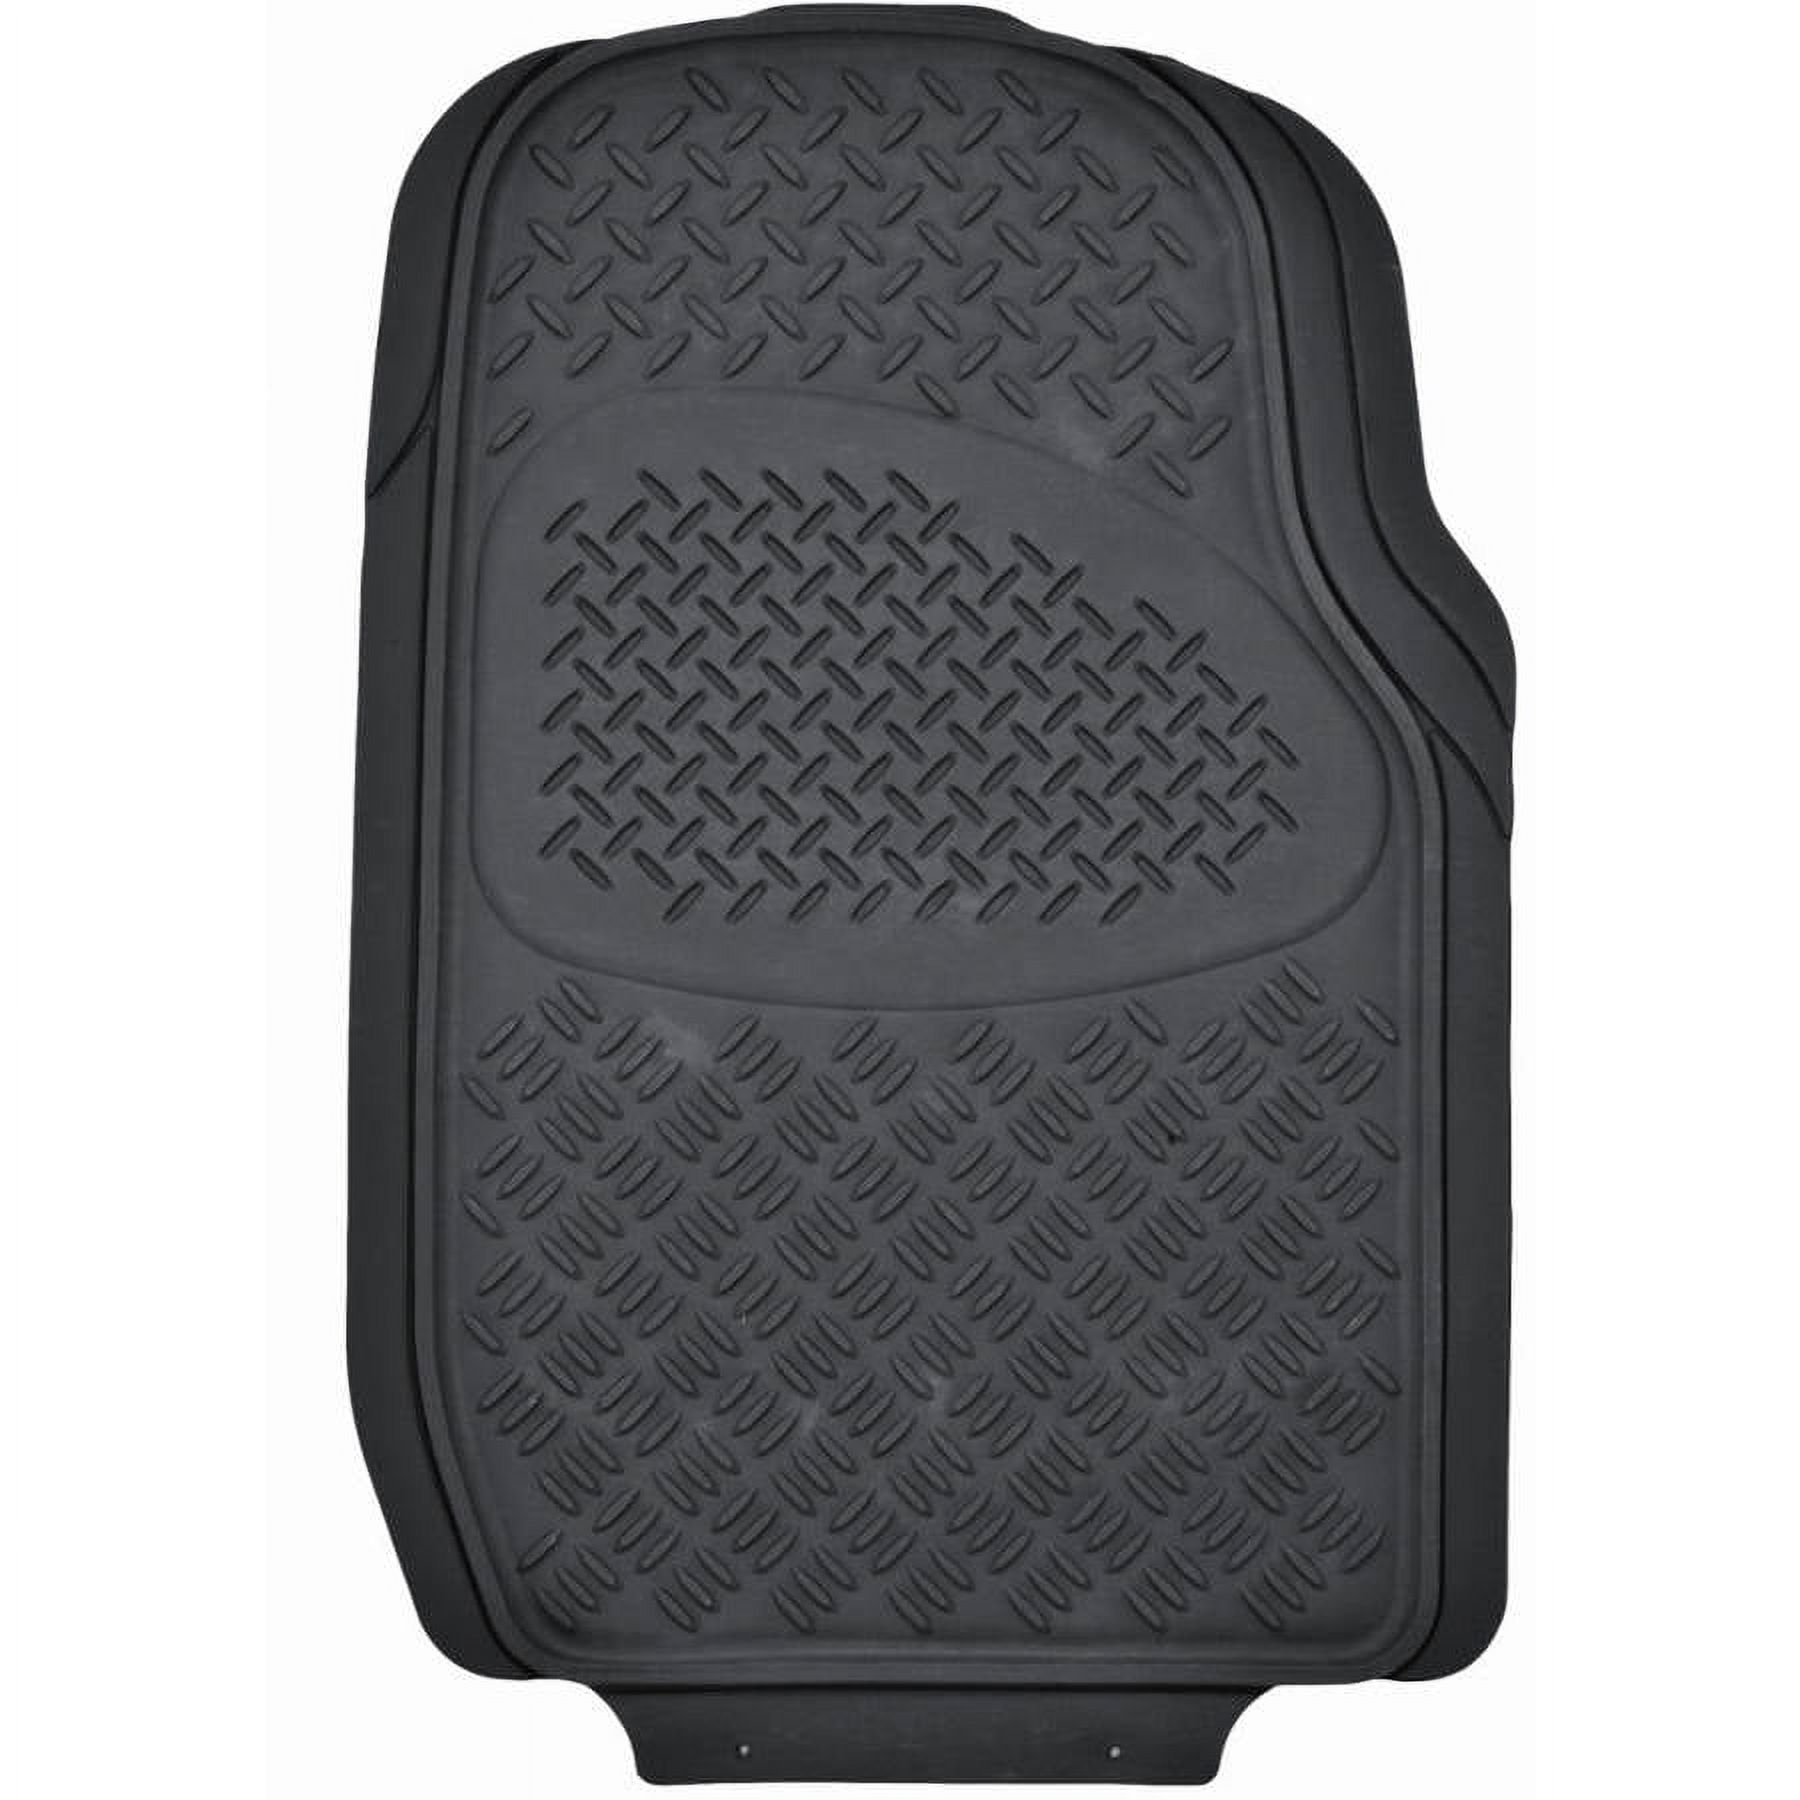 BDK Super Duty Rubber Floor Mats for Car SUV and Van 3 Rows with Cargo Mat, All Weather, Heavy Duty, 3 Colors - image 5 of 12